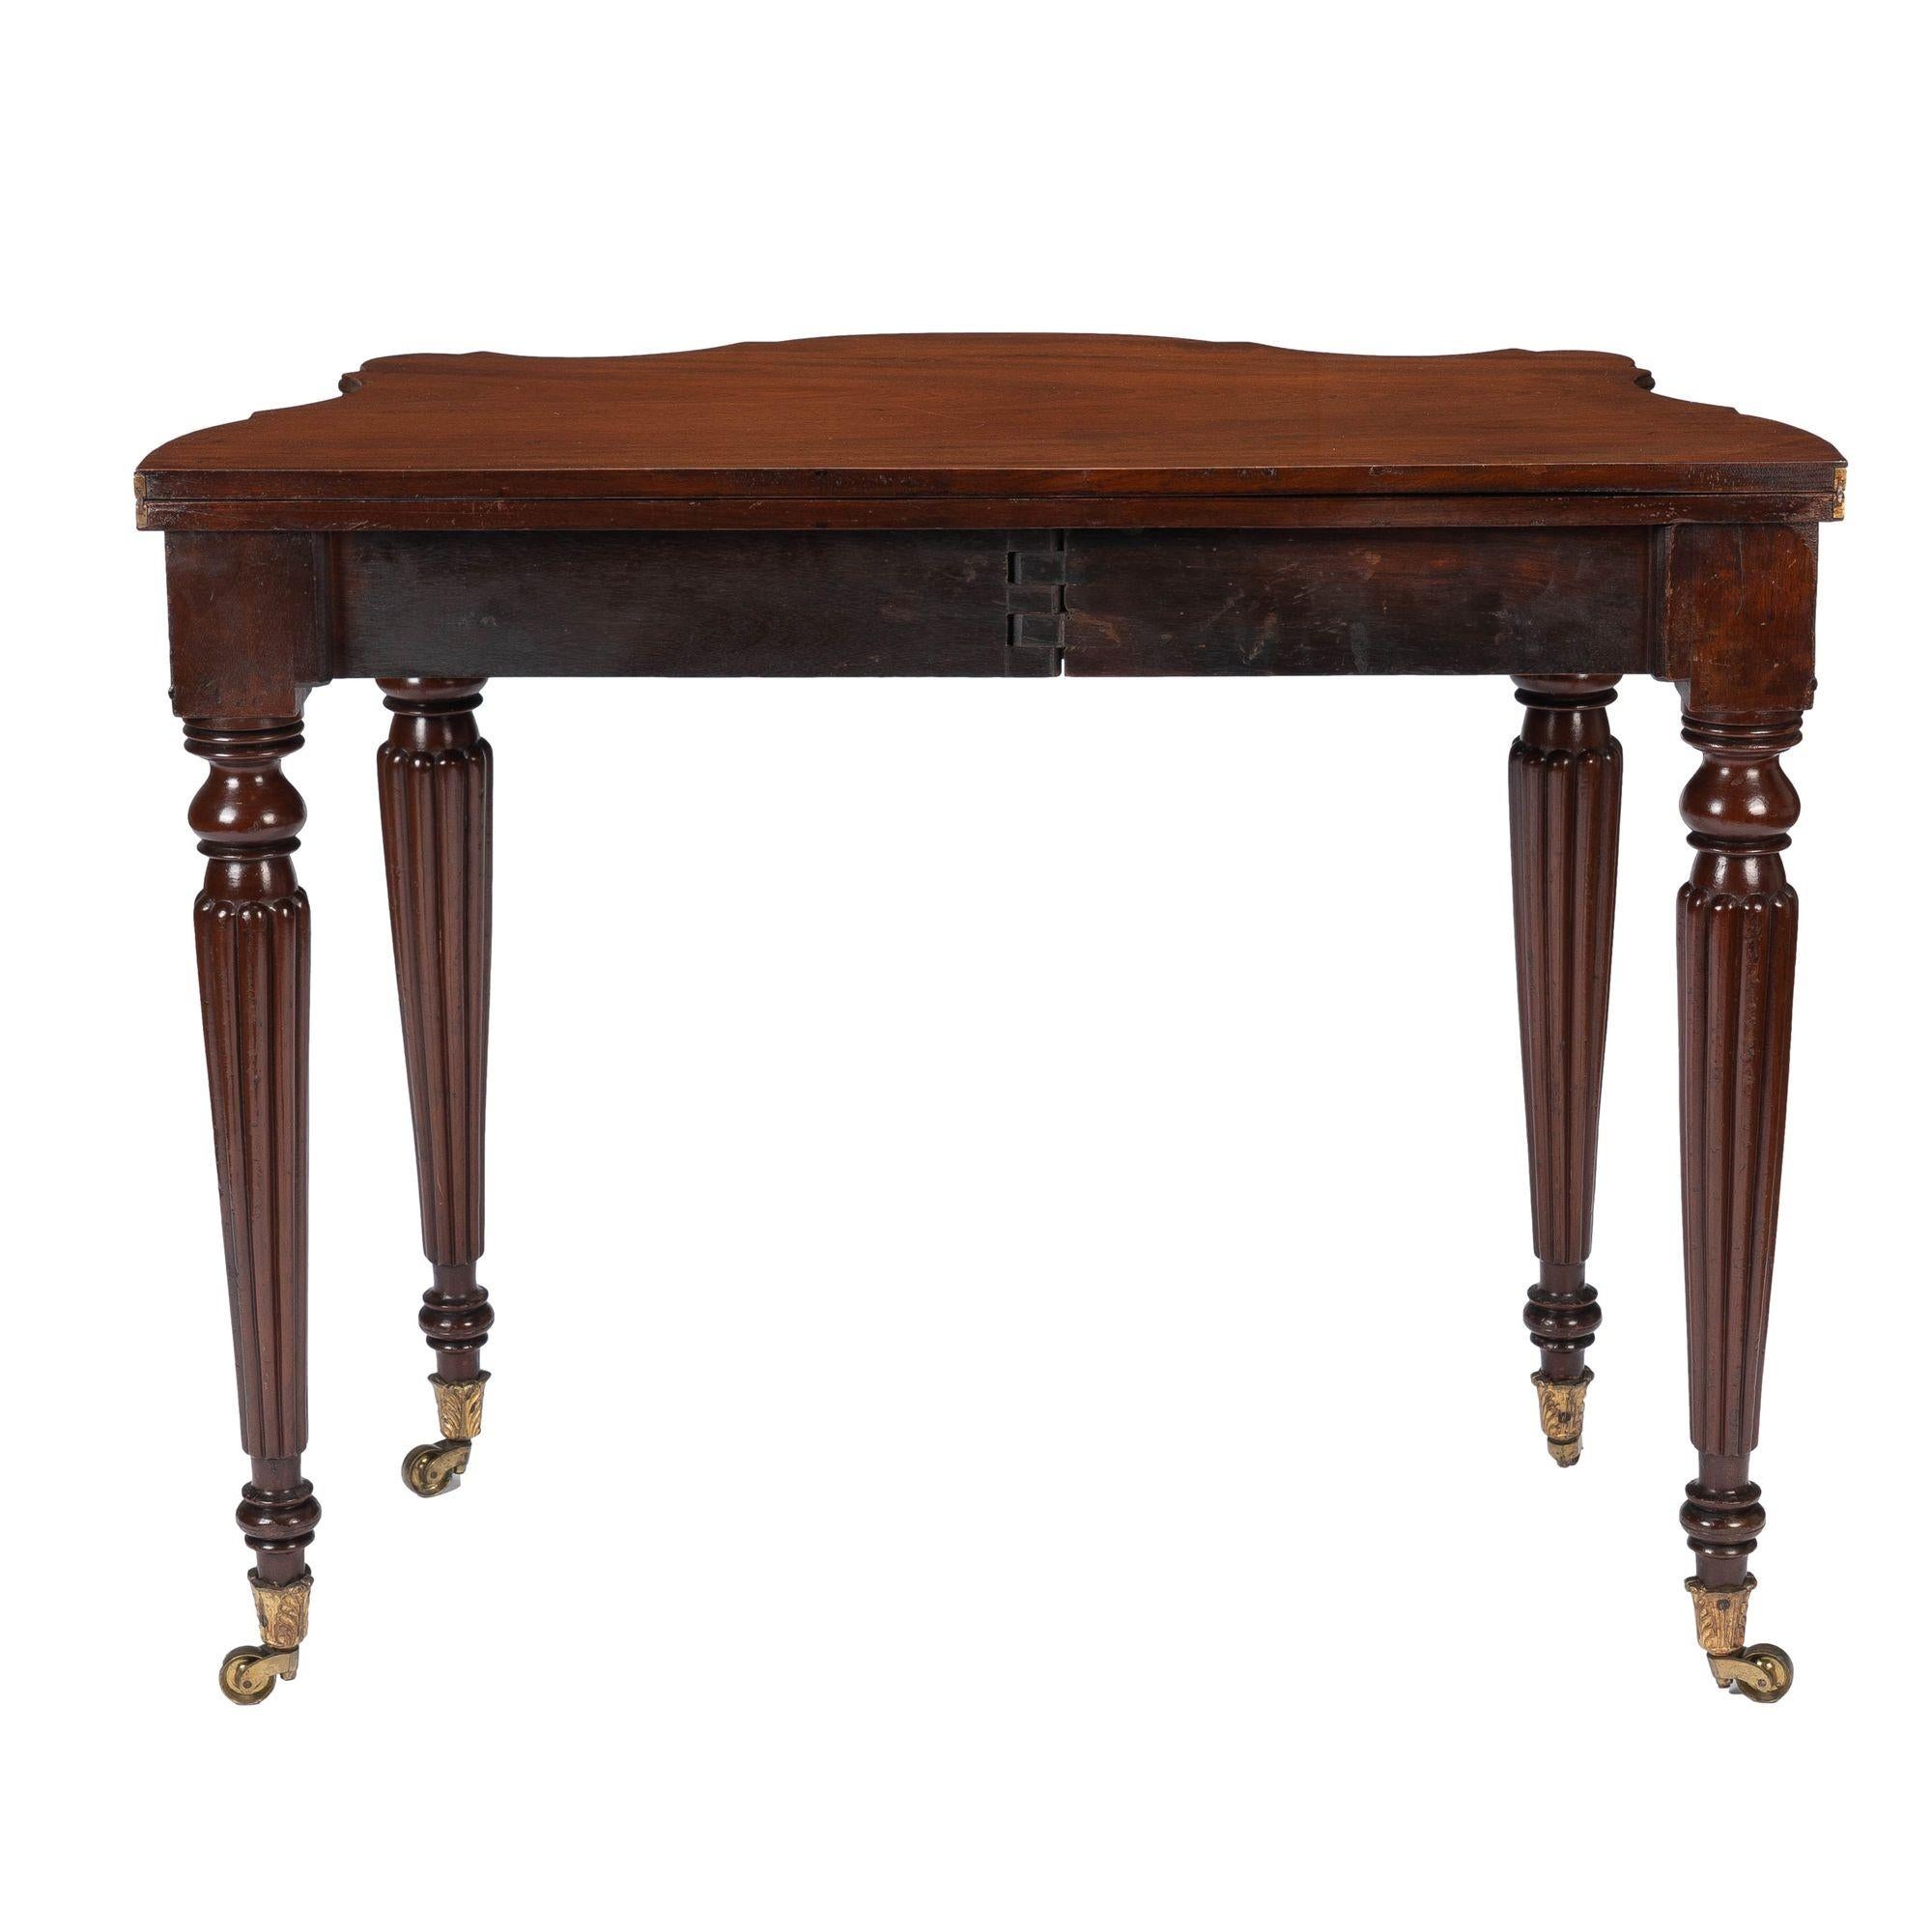 19th Century Samuel Field Macintire Attributed Mahogany Flip Top Game Table, c. 1810-15 For Sale